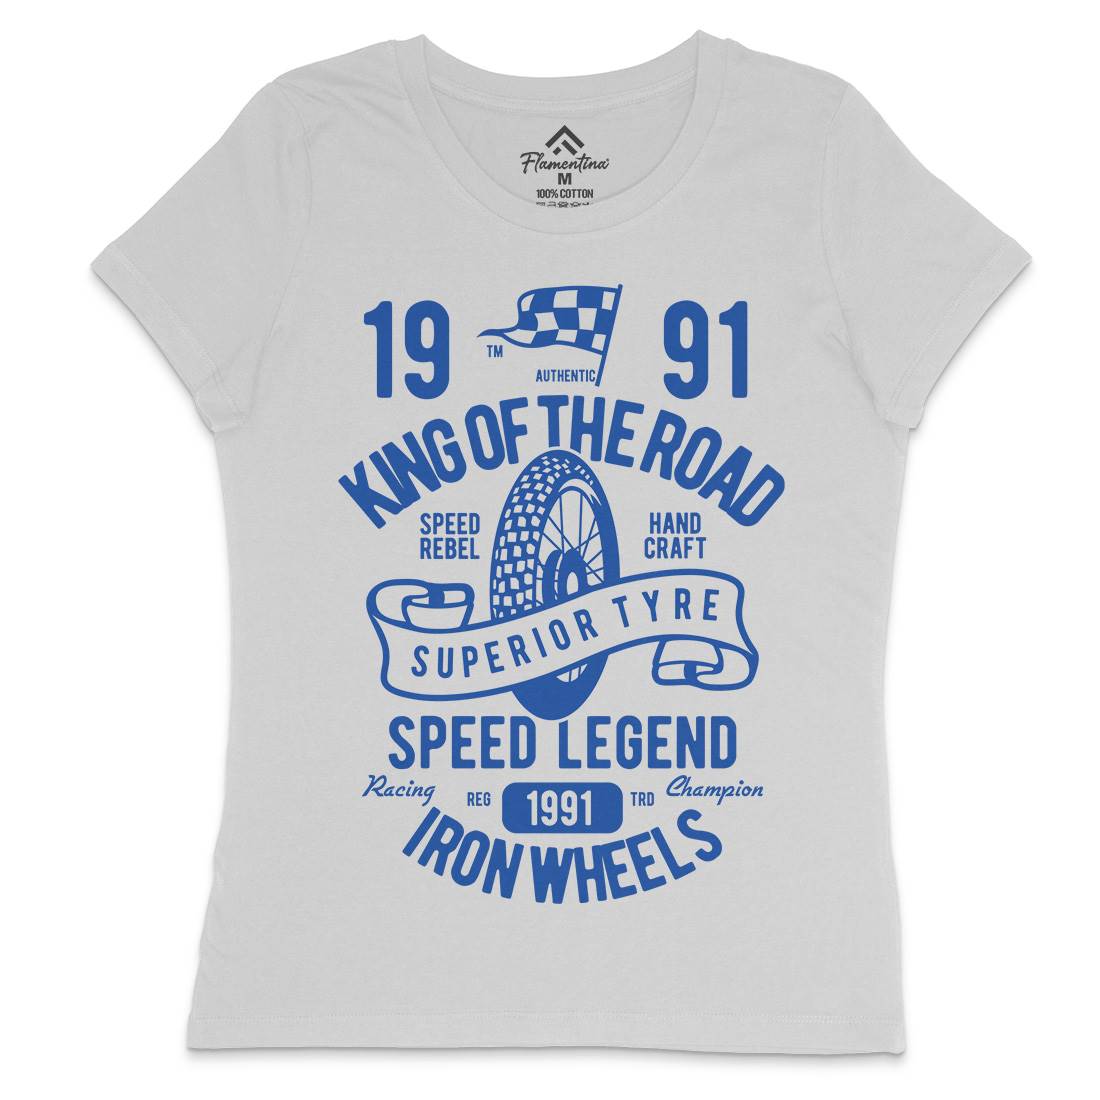 Superior Tyre King Of The Road Womens Crew Neck T-Shirt Motorcycles B458